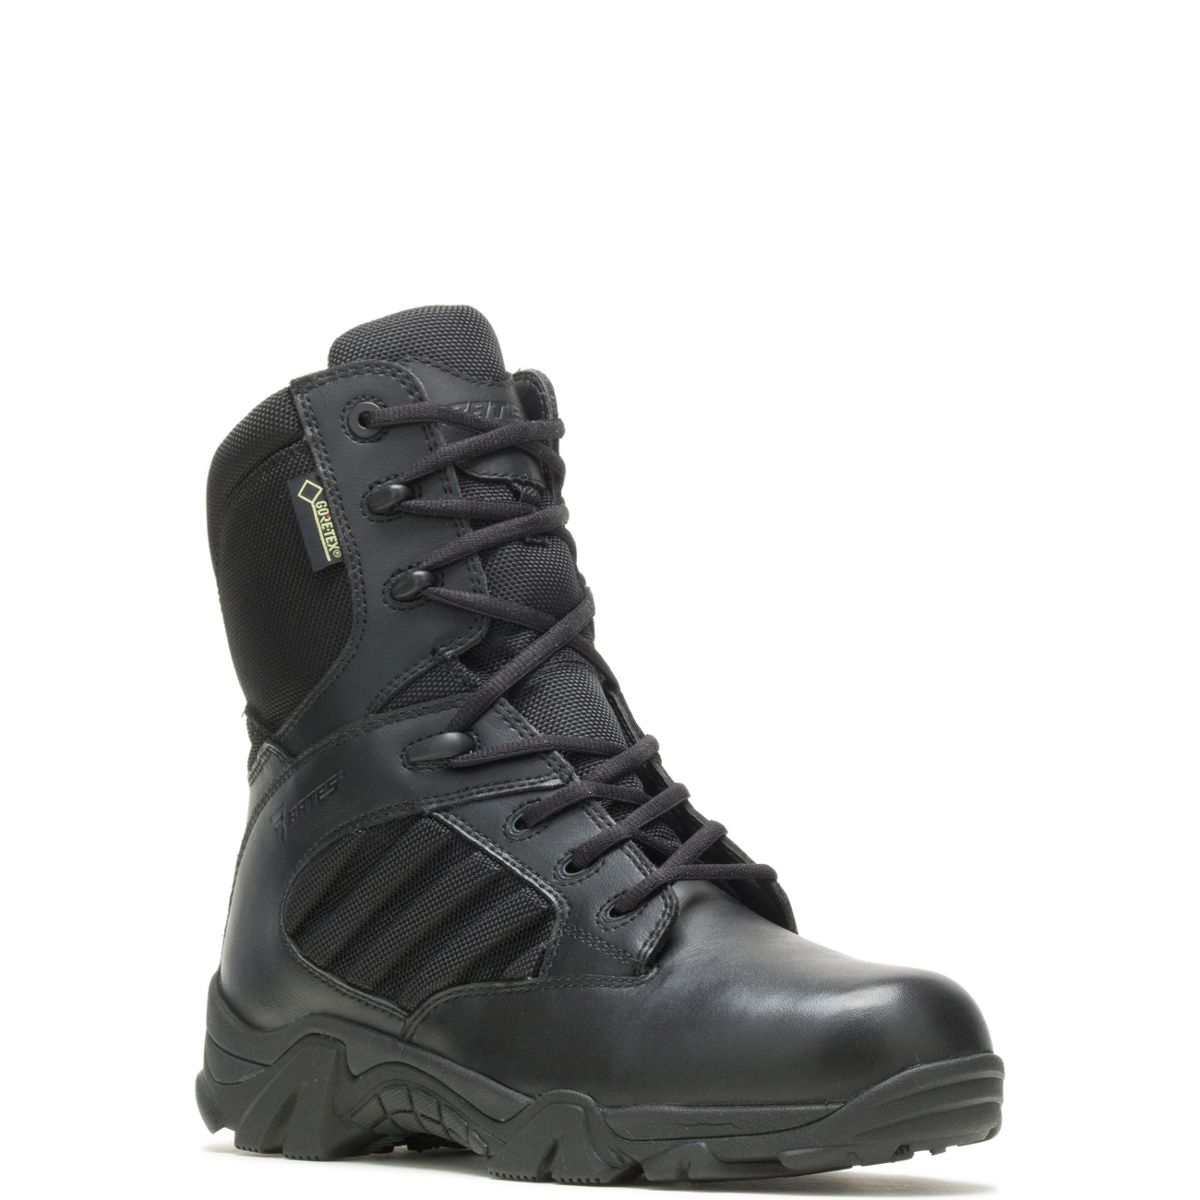 GX-8 Insulated Side Zip with GORE-TEX® - Tactical | Wolverine Footwear